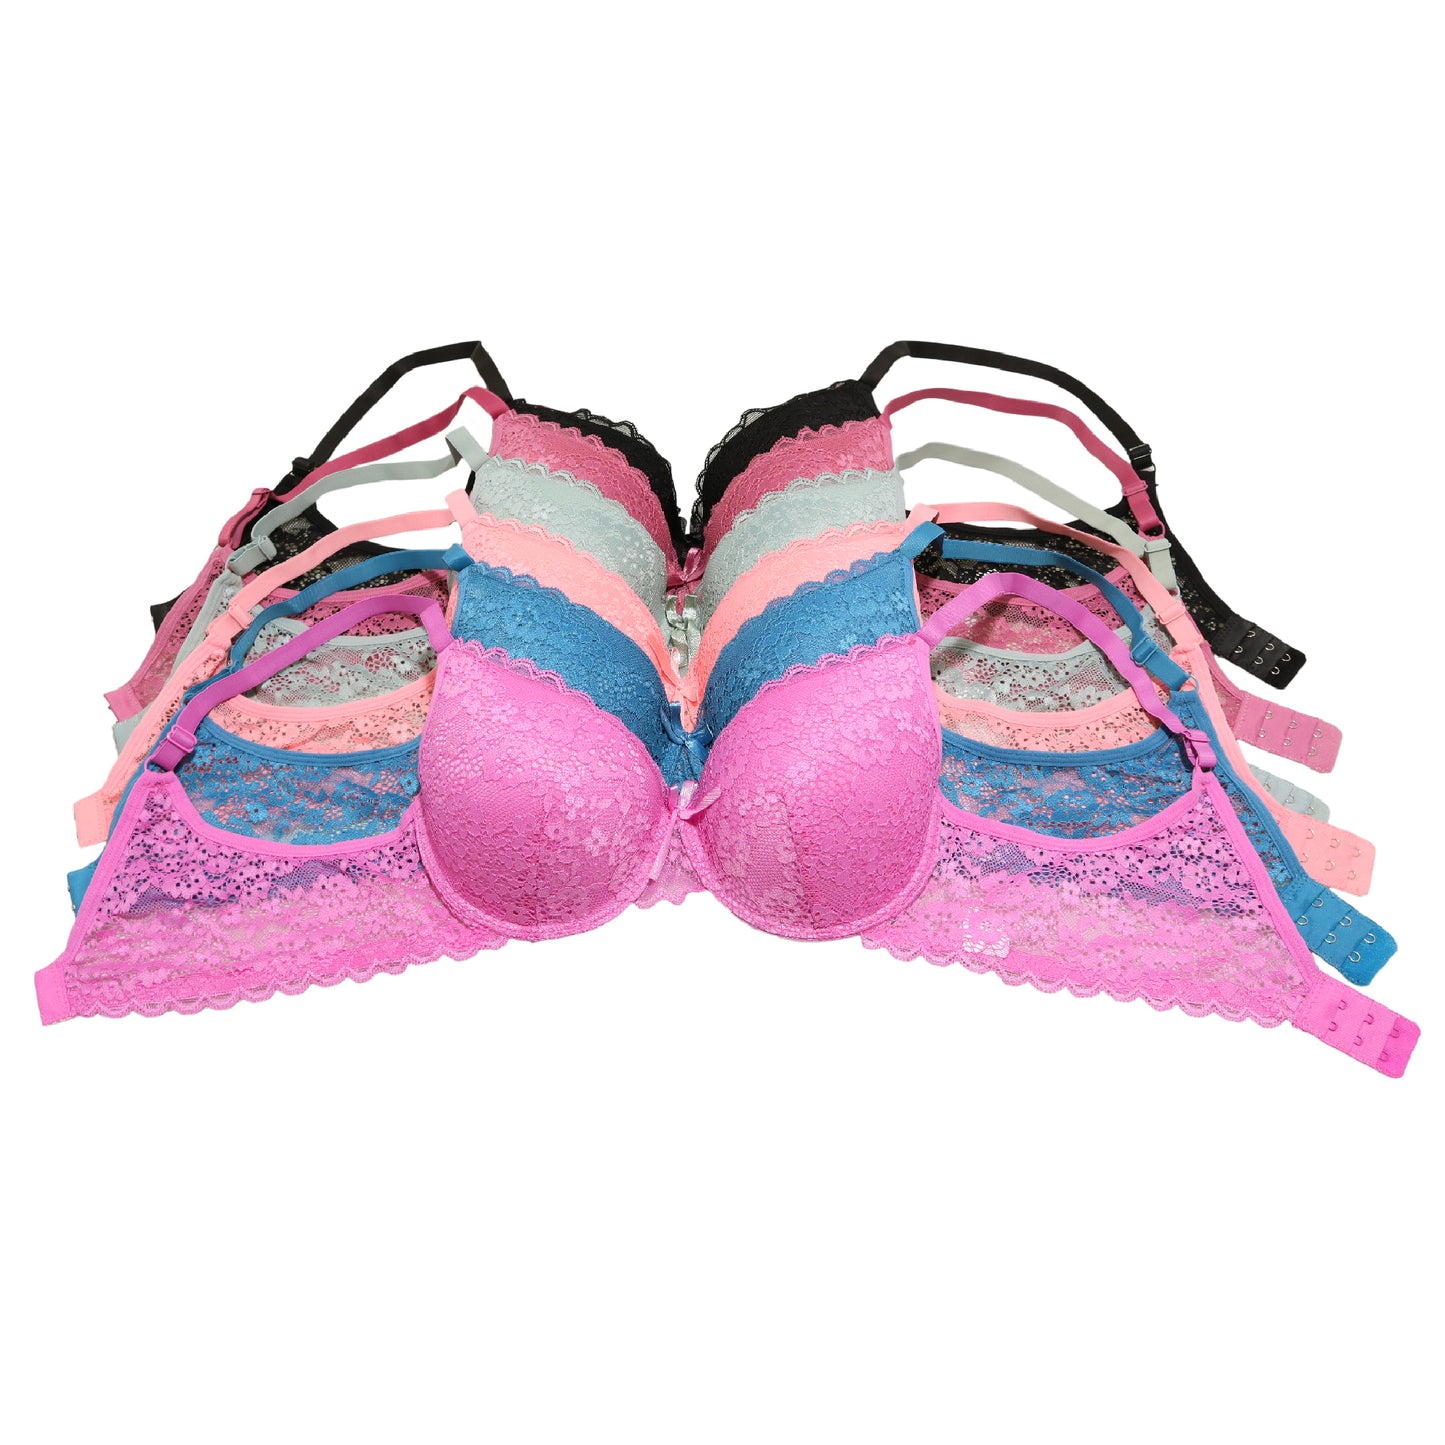 Matching Bras and Panties Set with Poppy Lace Design (6-Pack)